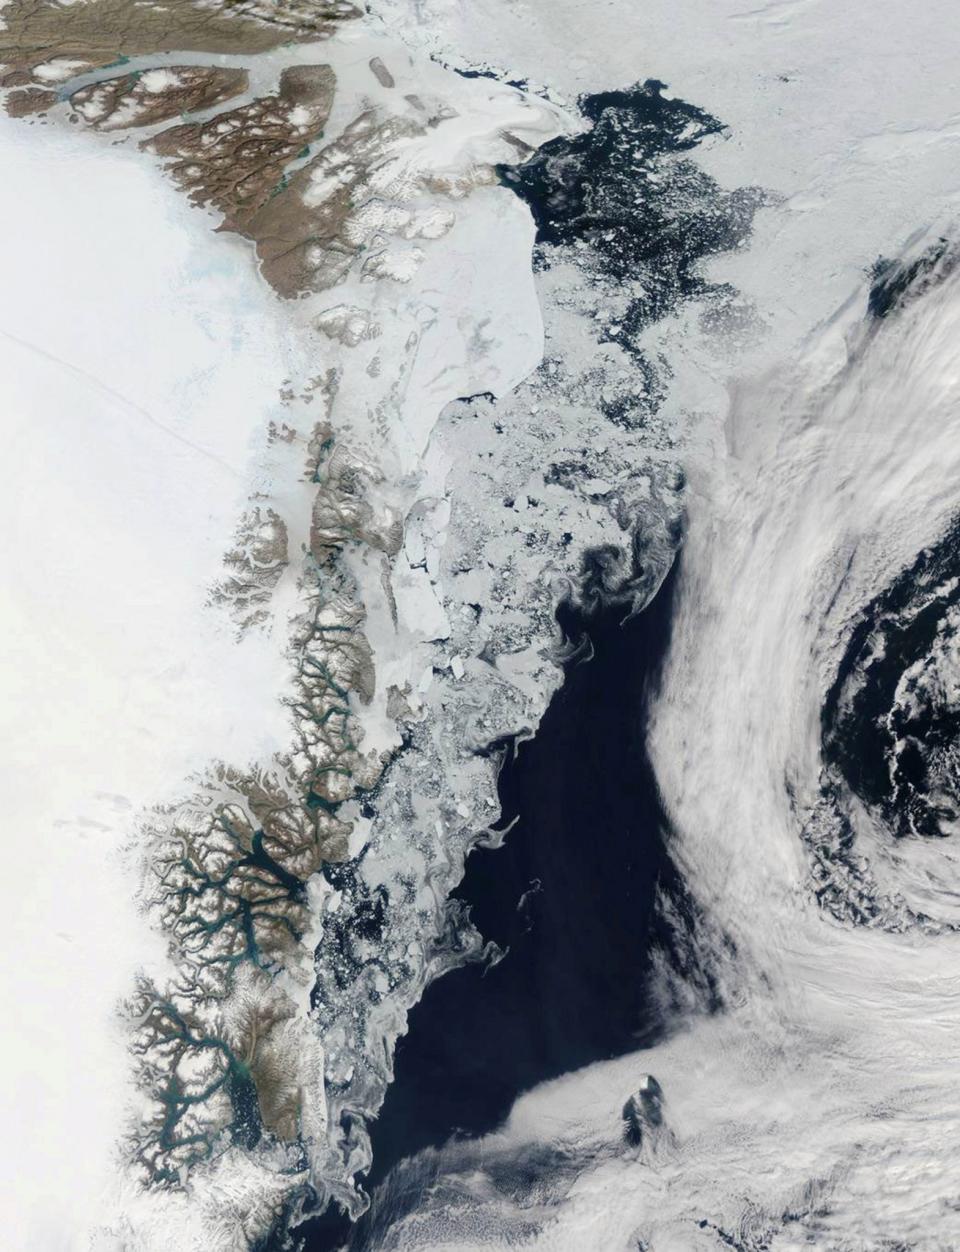 Large chunks of melting sea ice in Greenland